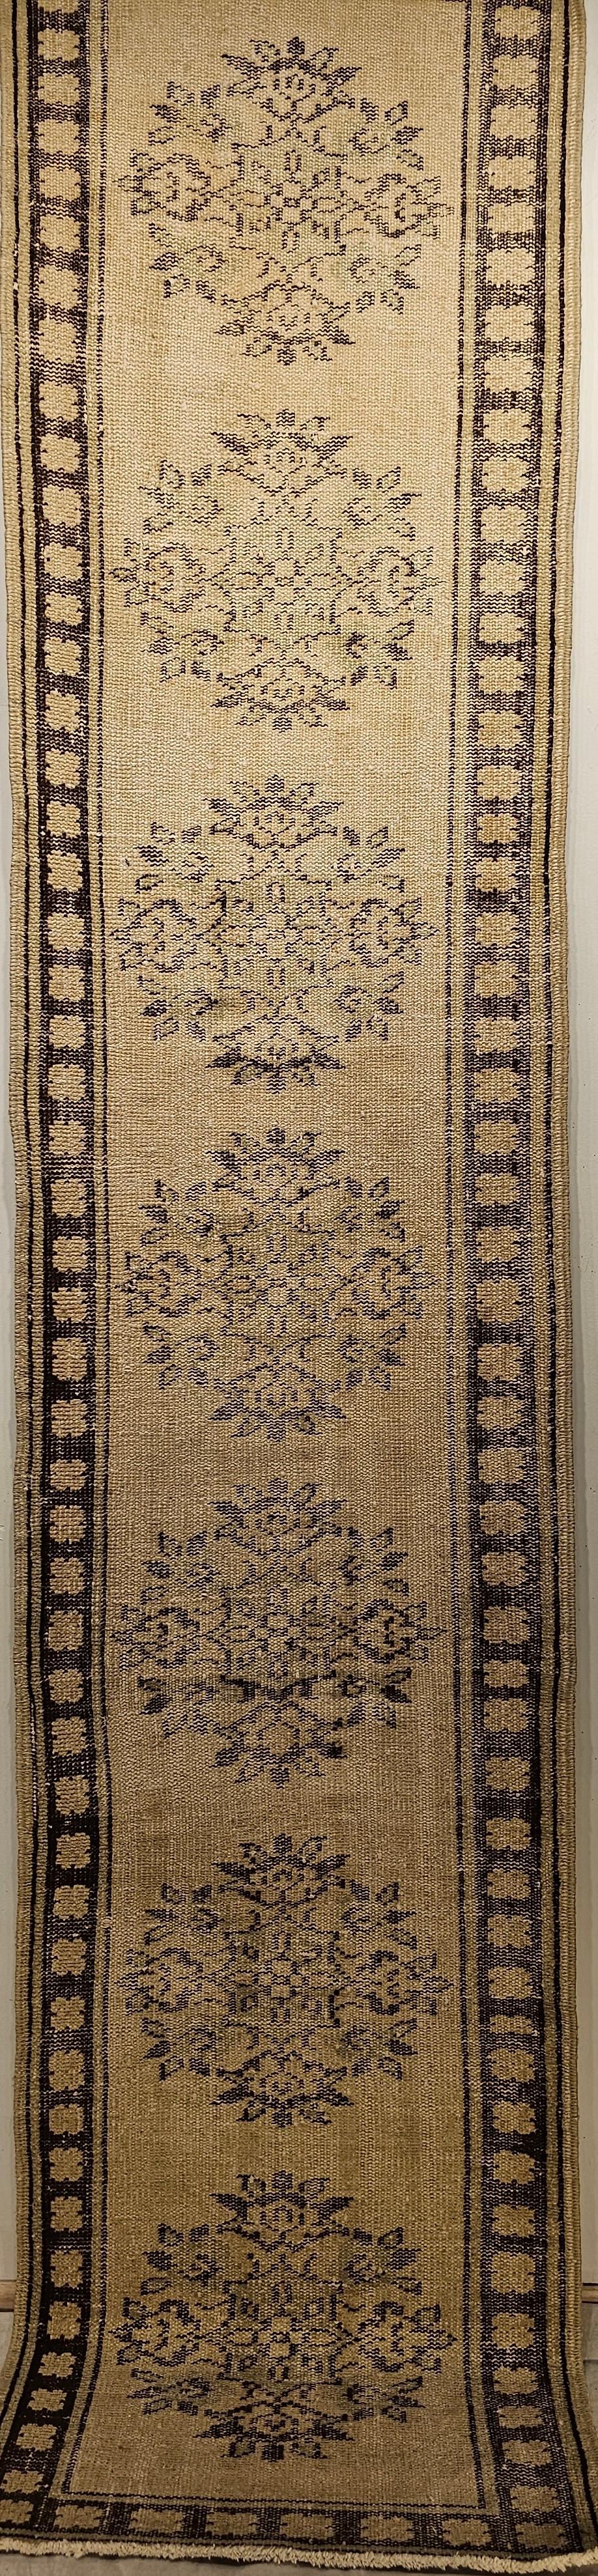 A vintage Turkish Oushak runner from the early 1900s in beautiful earth tone colors. The Turkish Oushak runner has a multiple medallion design set in an ivory color field.   The medallions are in brown and sage green colors.  The narrow border is